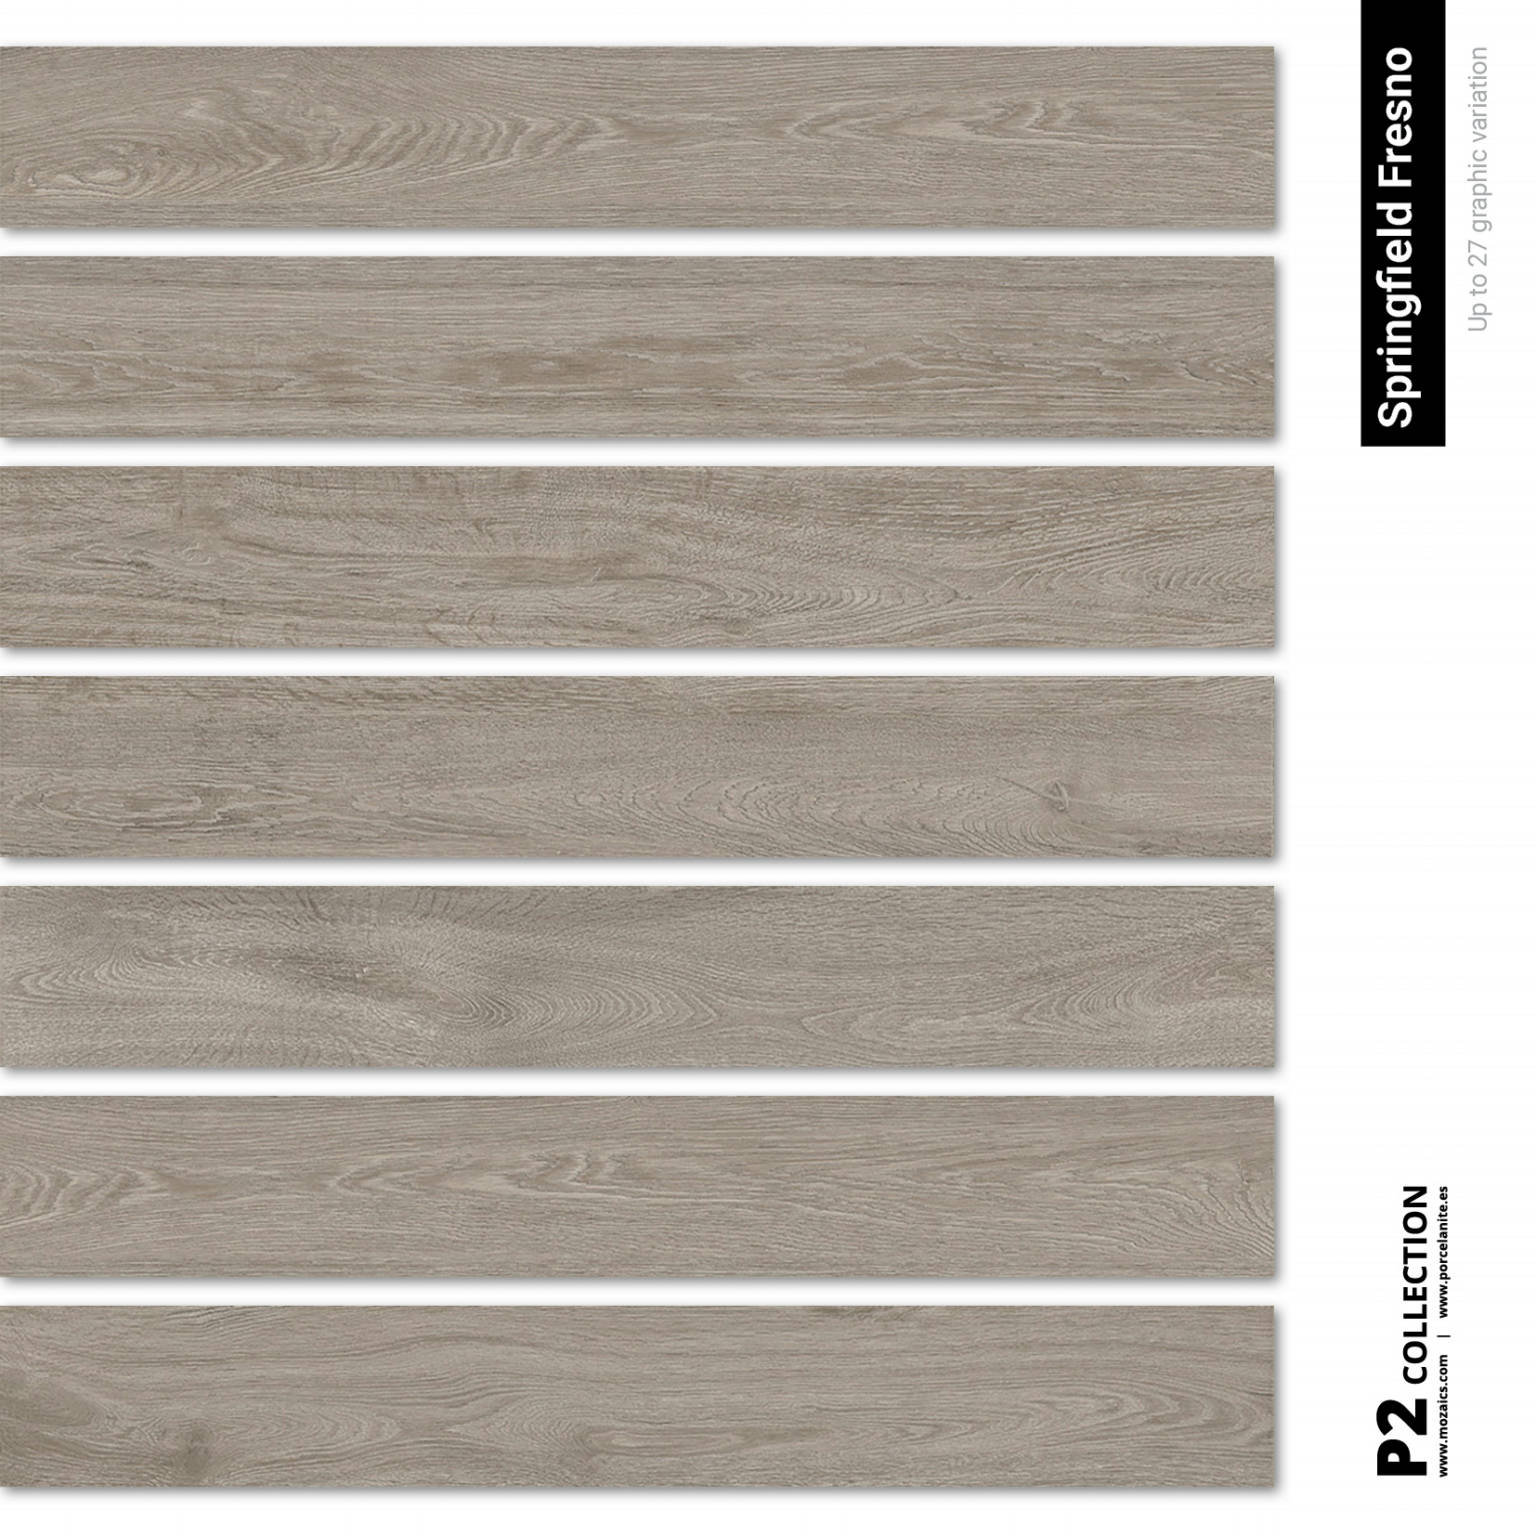 Springfield 6646 Fresno Soft Touch | Stones And More | Finest selection of Mosaics, Glass, Tile and Stone